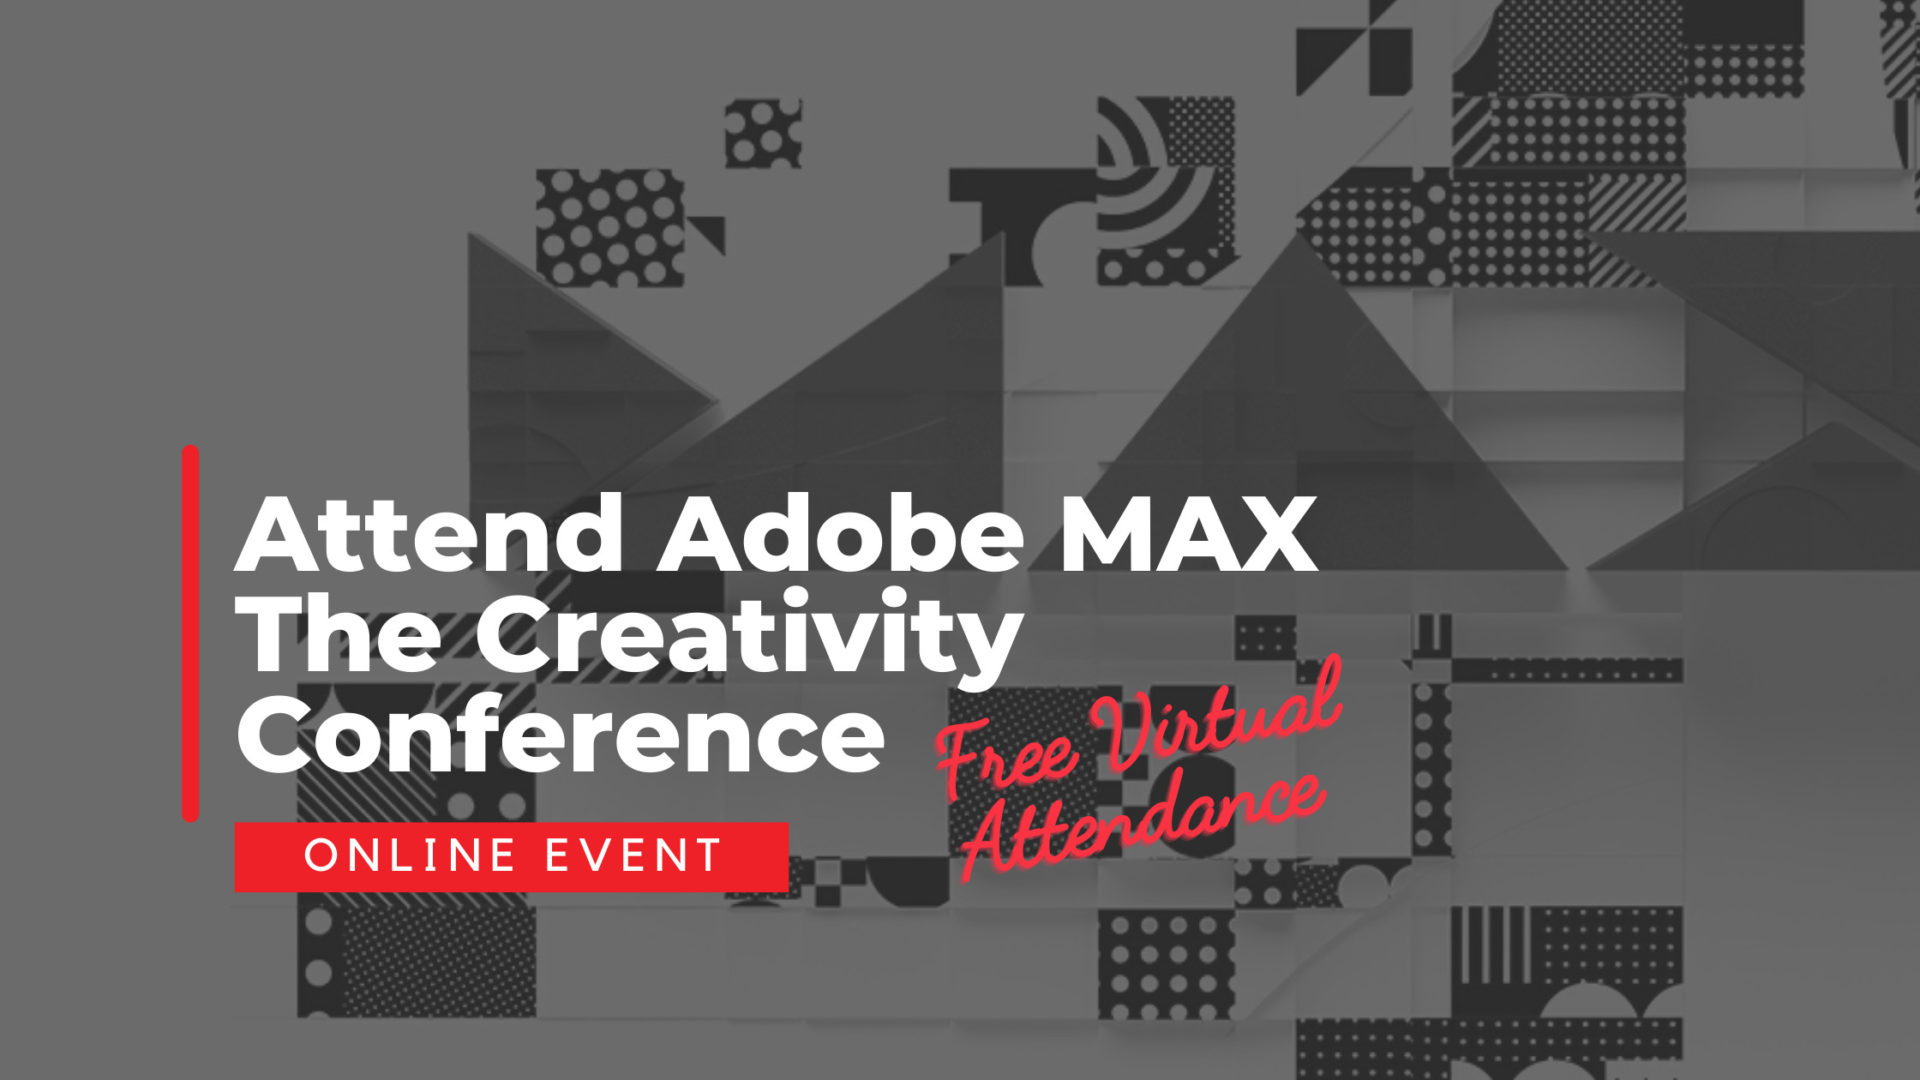 Join Adobe MAX The Creativity Conference for Free Online